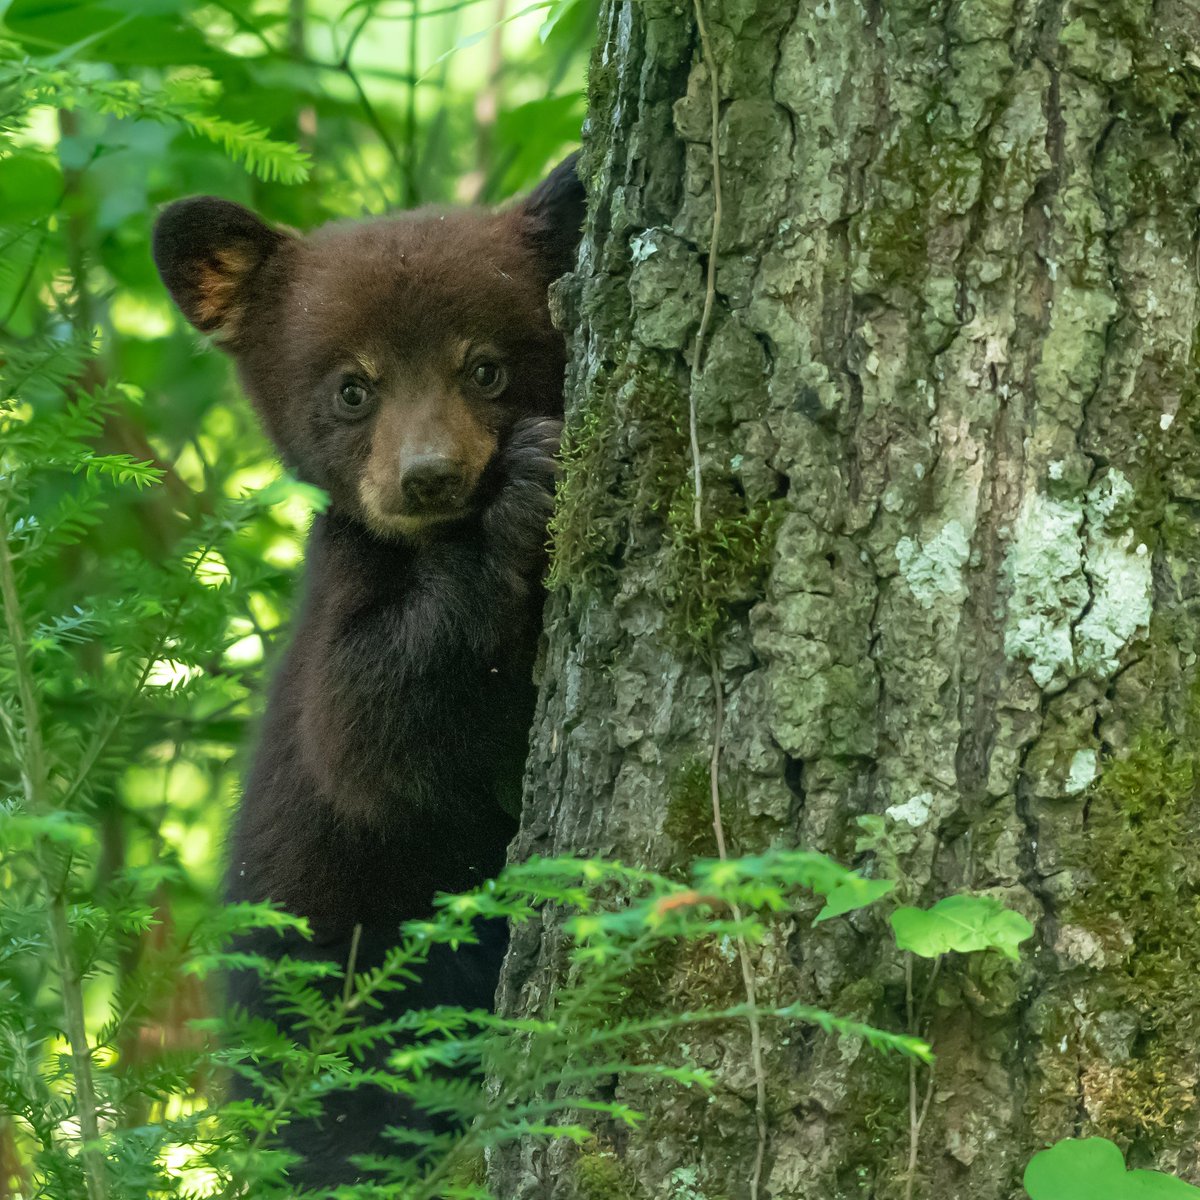 How cute is this little bear cub? What an amazing time in the smokey mountains. I still can't believe how cool it was. Can't wait to share a video with everyone! #d850 #bear #bearcub #bearcubs #smokeymountains #cadescove #animalshots #naturephotoportal #naturephotography